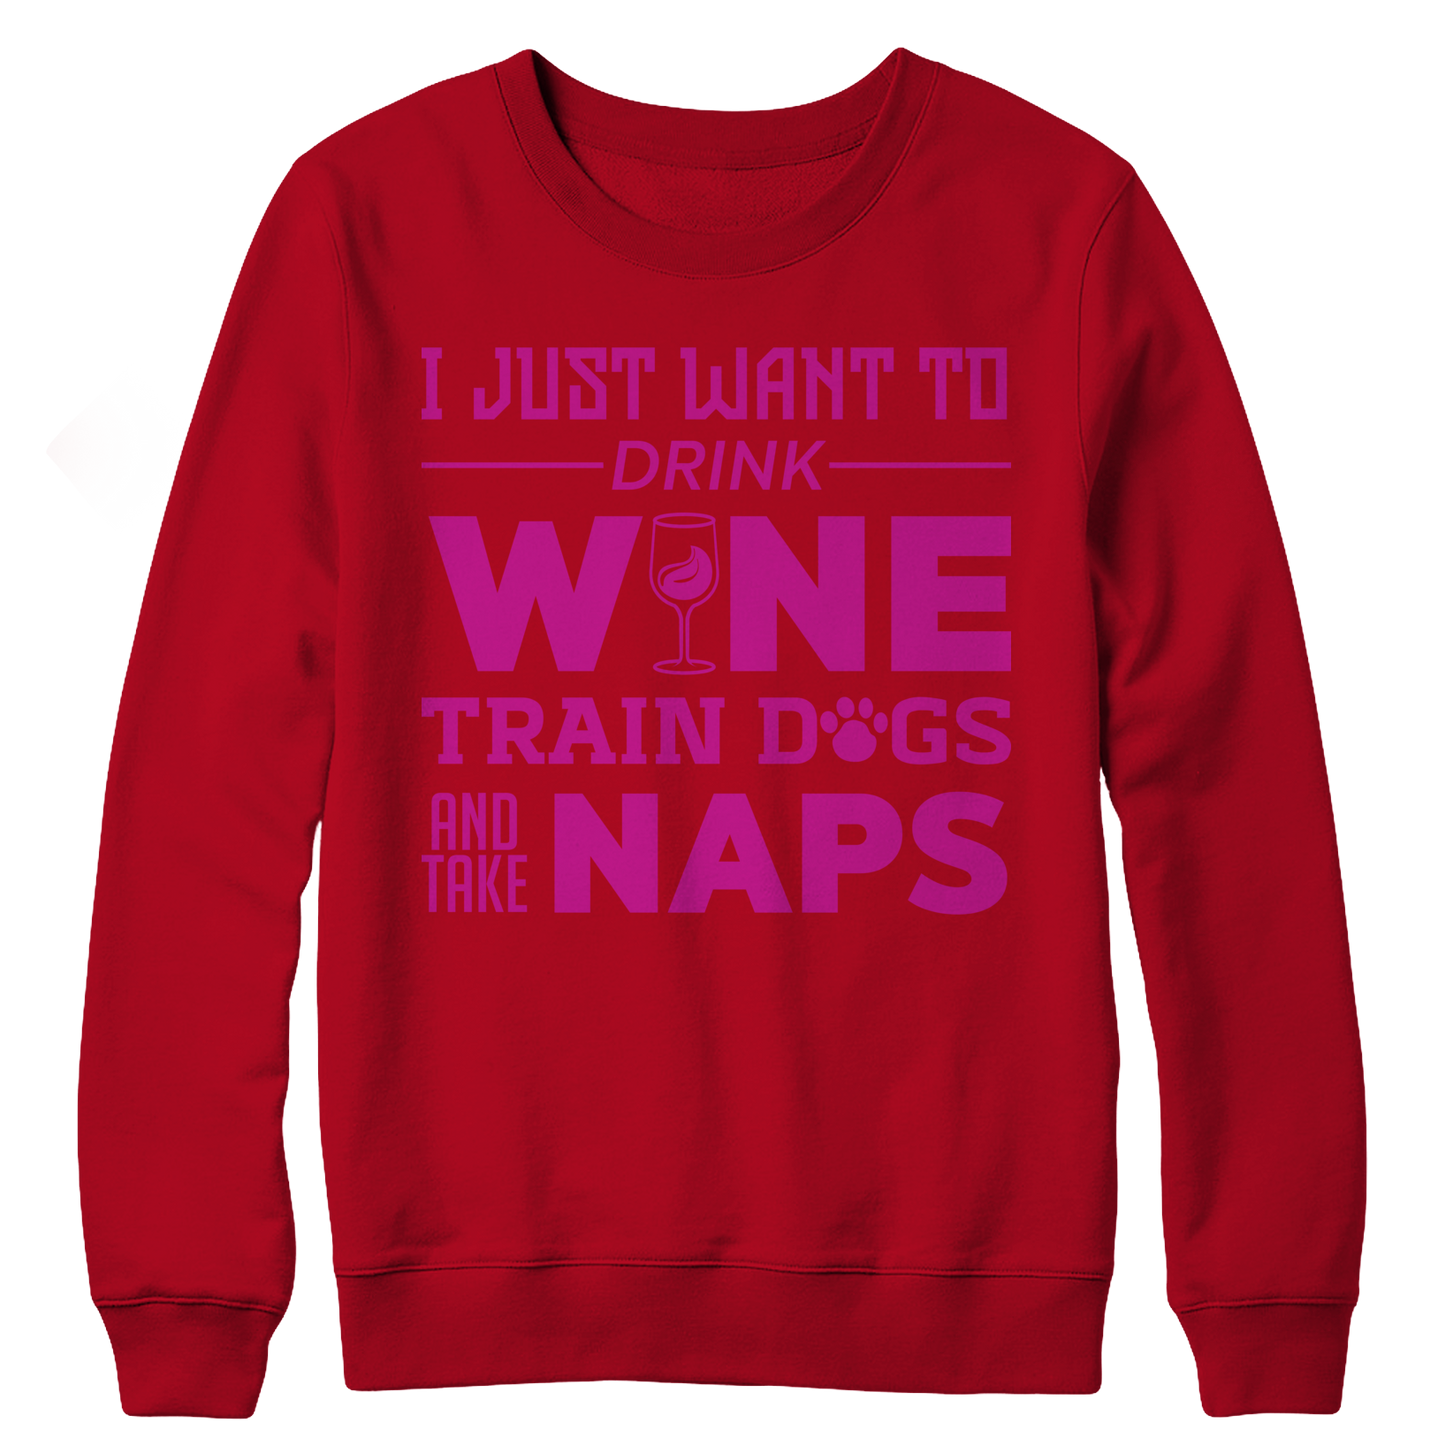 I Just Want To Drink Wine Train Dogs and Take Naps Crewneck Fleece